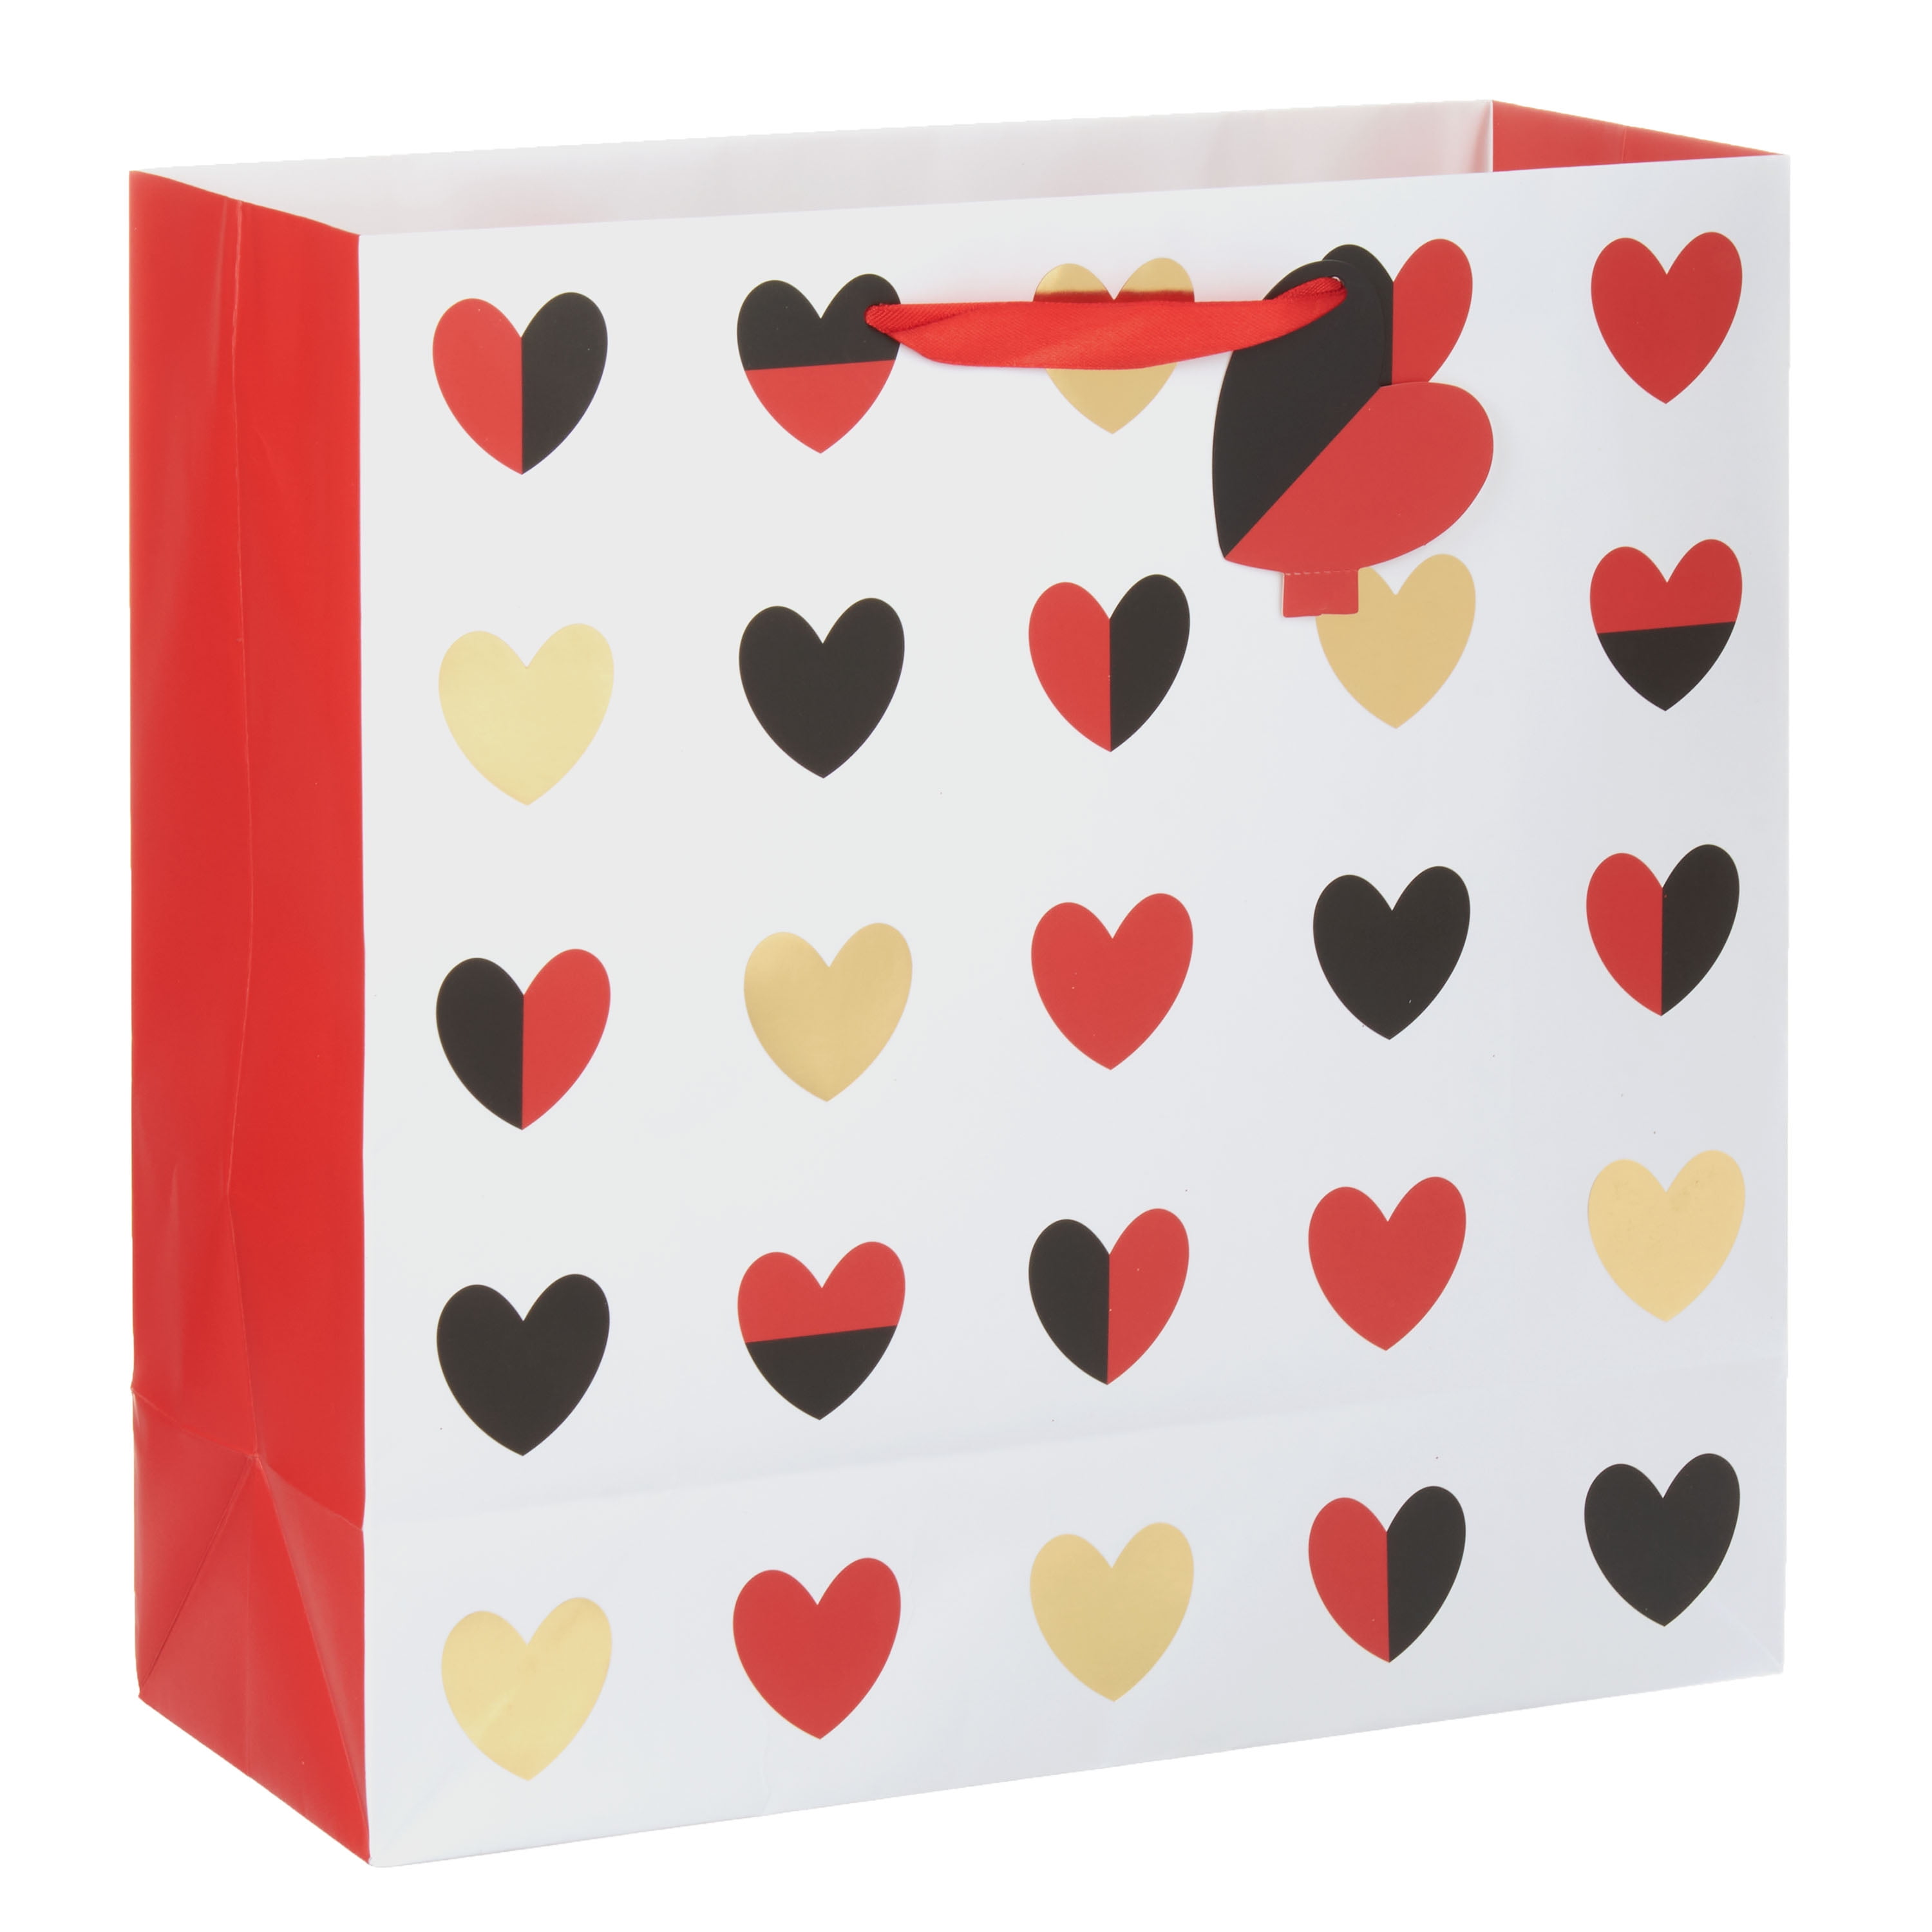 WAY TO CELEBRATE! Way To Celebrate Valentine's Day Red, Gold, and Black Hearts Large Square Gift Bag, Paper